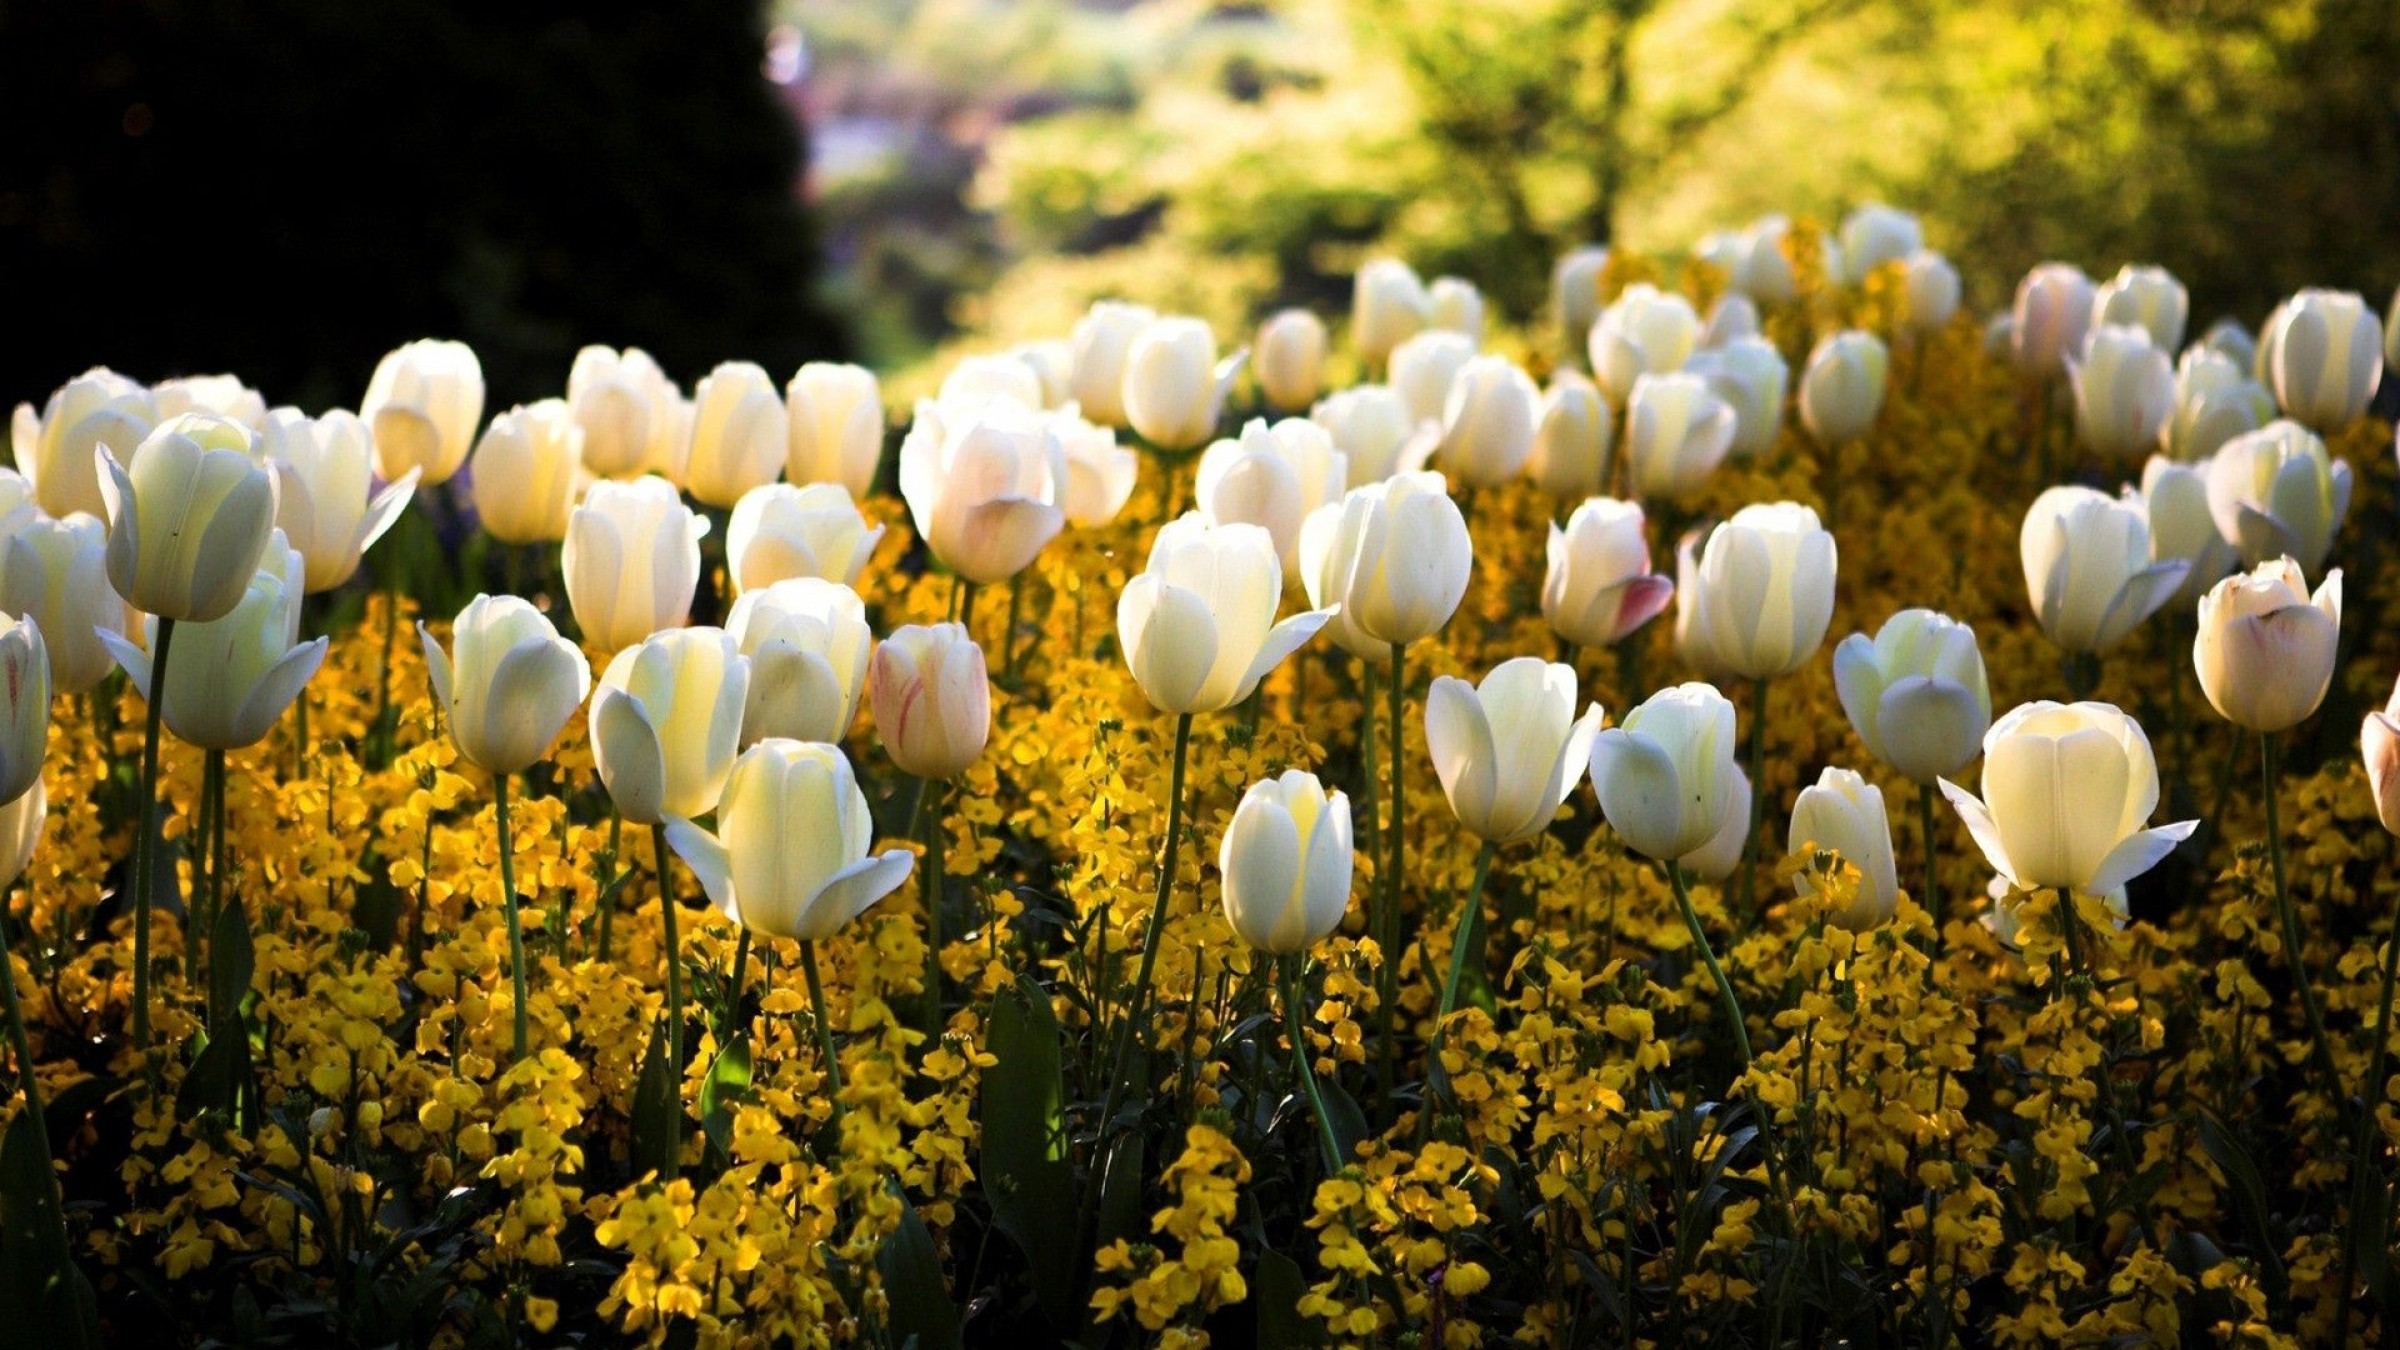 White Tulips & Yellow Flowers Picture, Photo, and Image for Facebook, Tumblr, , and Twitter